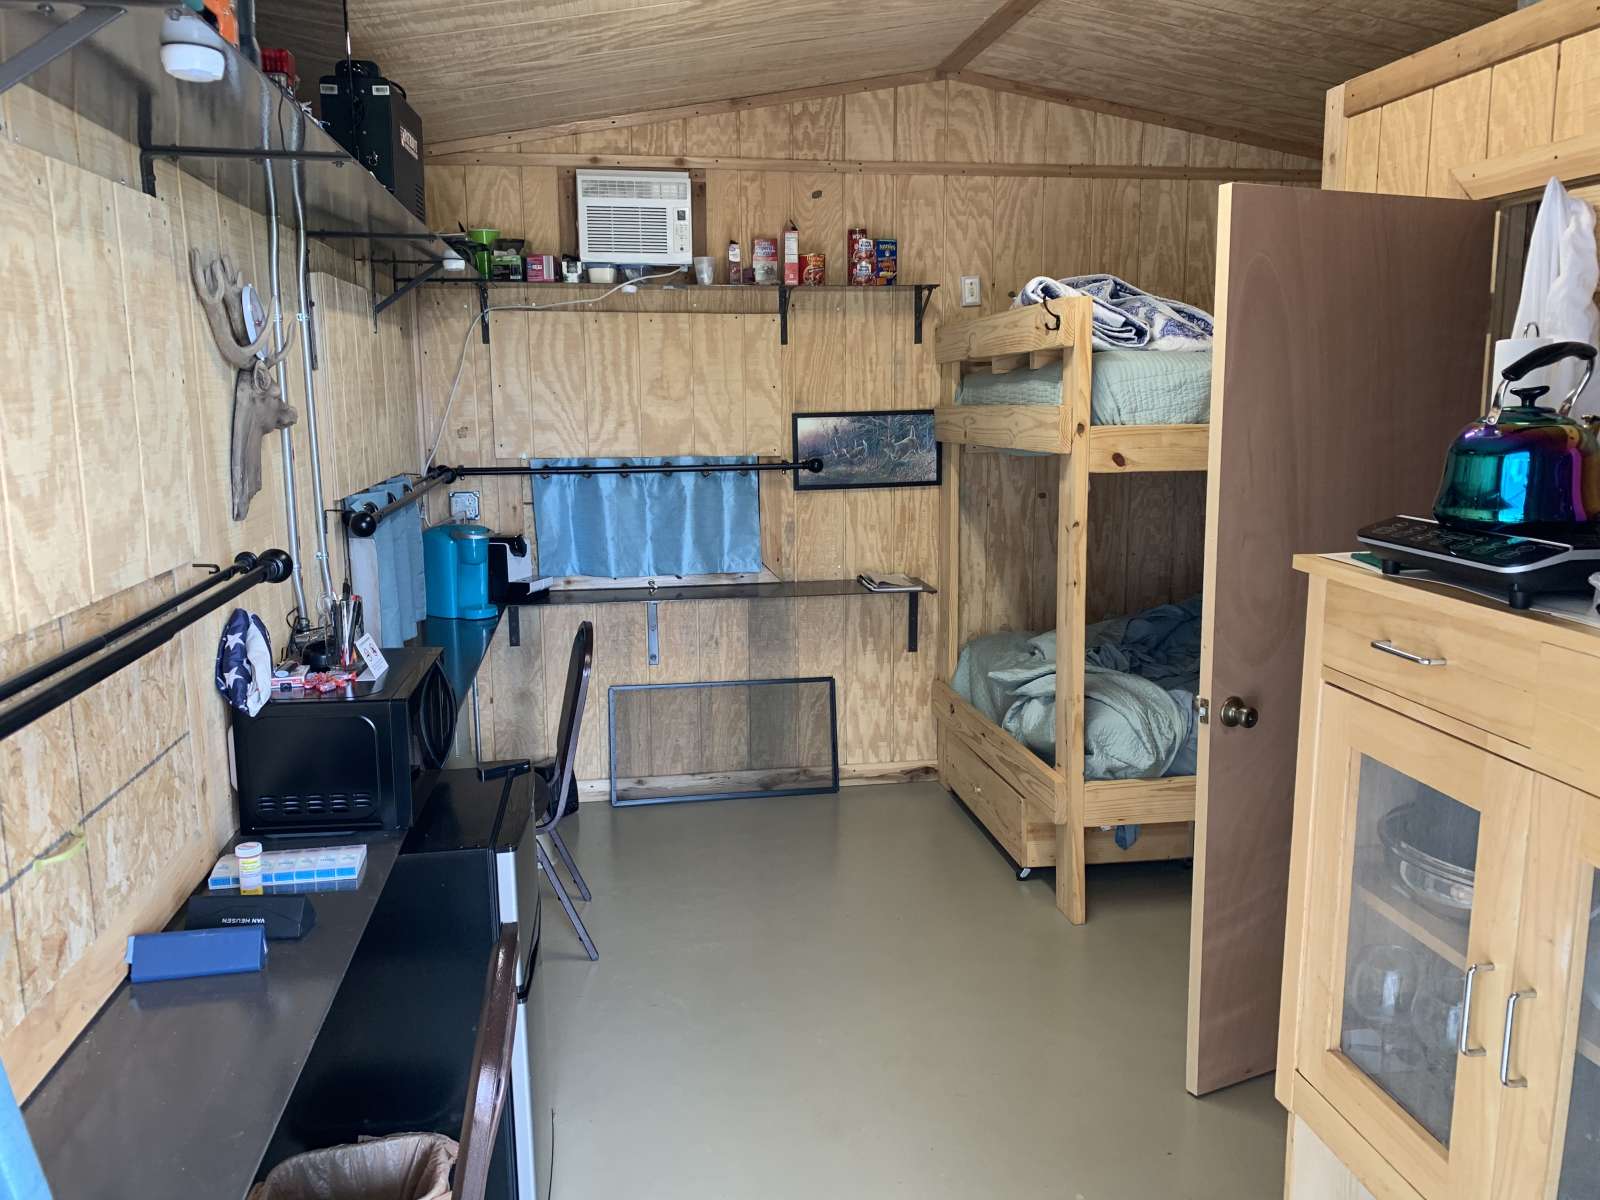 A room with bunk beds and desk in it